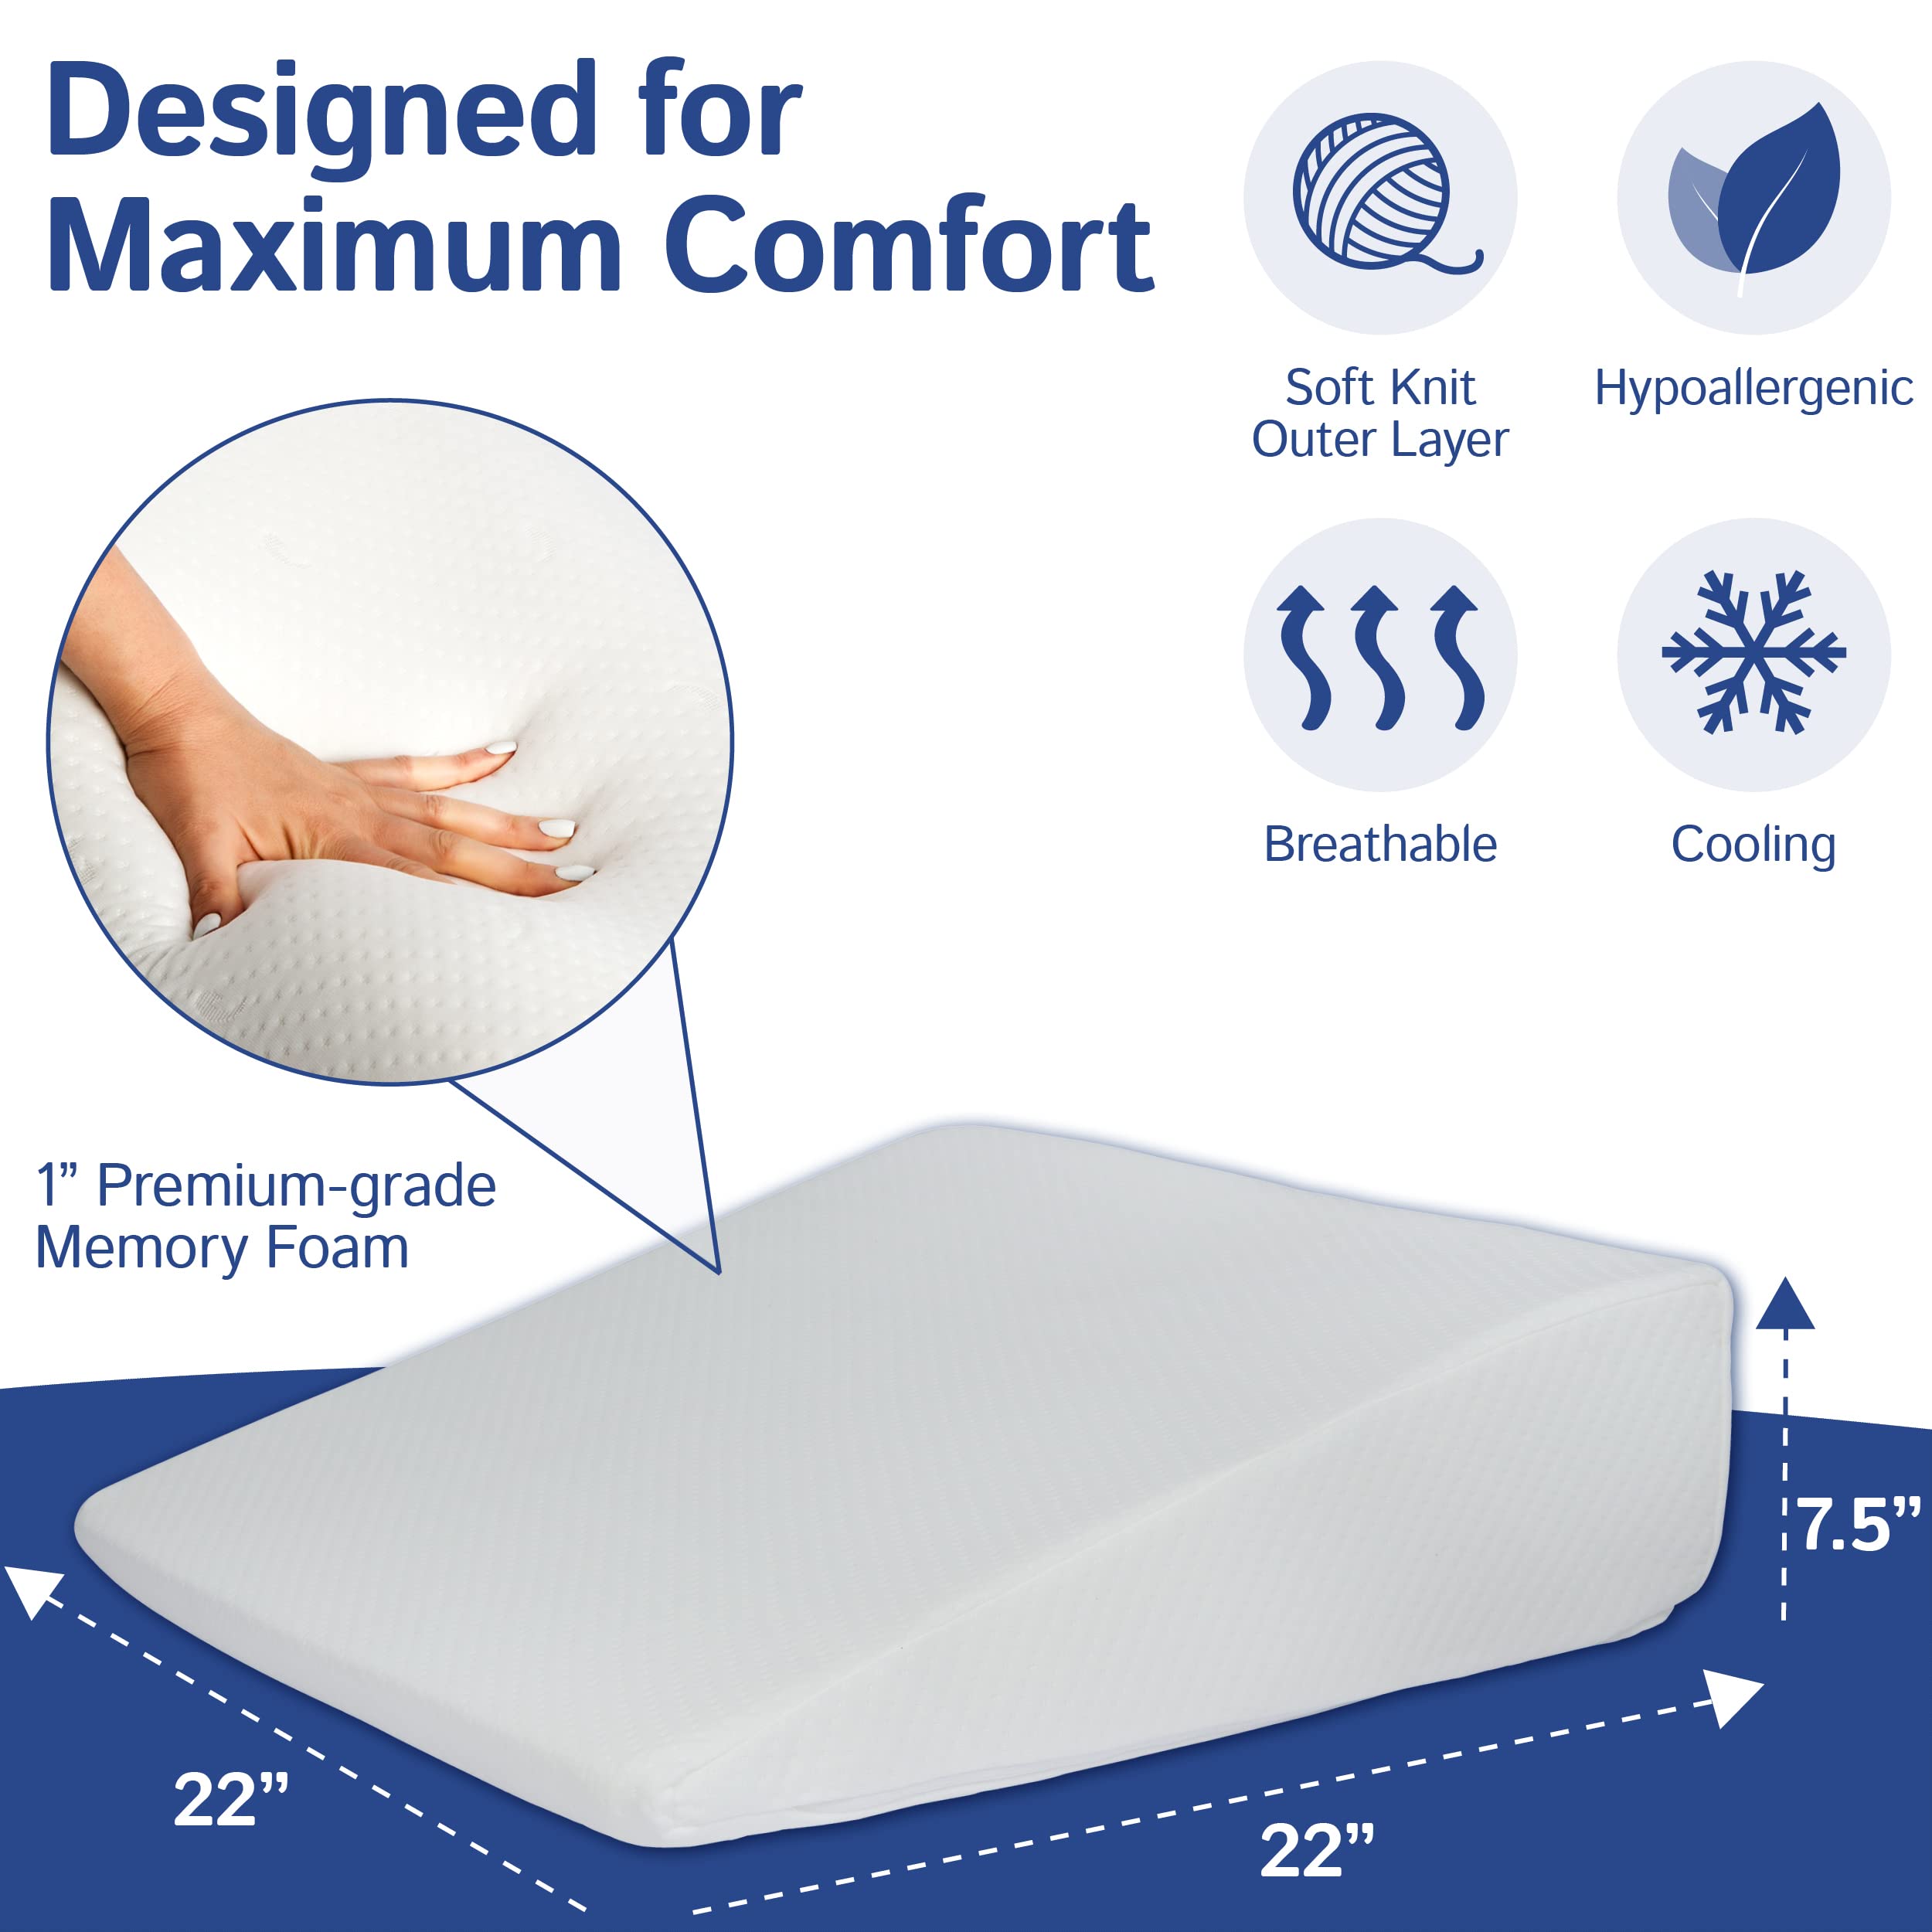 Bed Wedge Pillow With Memory Foam Top 7.5in - Ideal For Comfortable, Restful Sleeping - Wedge Pillow Neck & Back Pain Relief, Acid Reflux, Snoring, Heartburn, Allergies - Versatile & Washable Cover  - Good